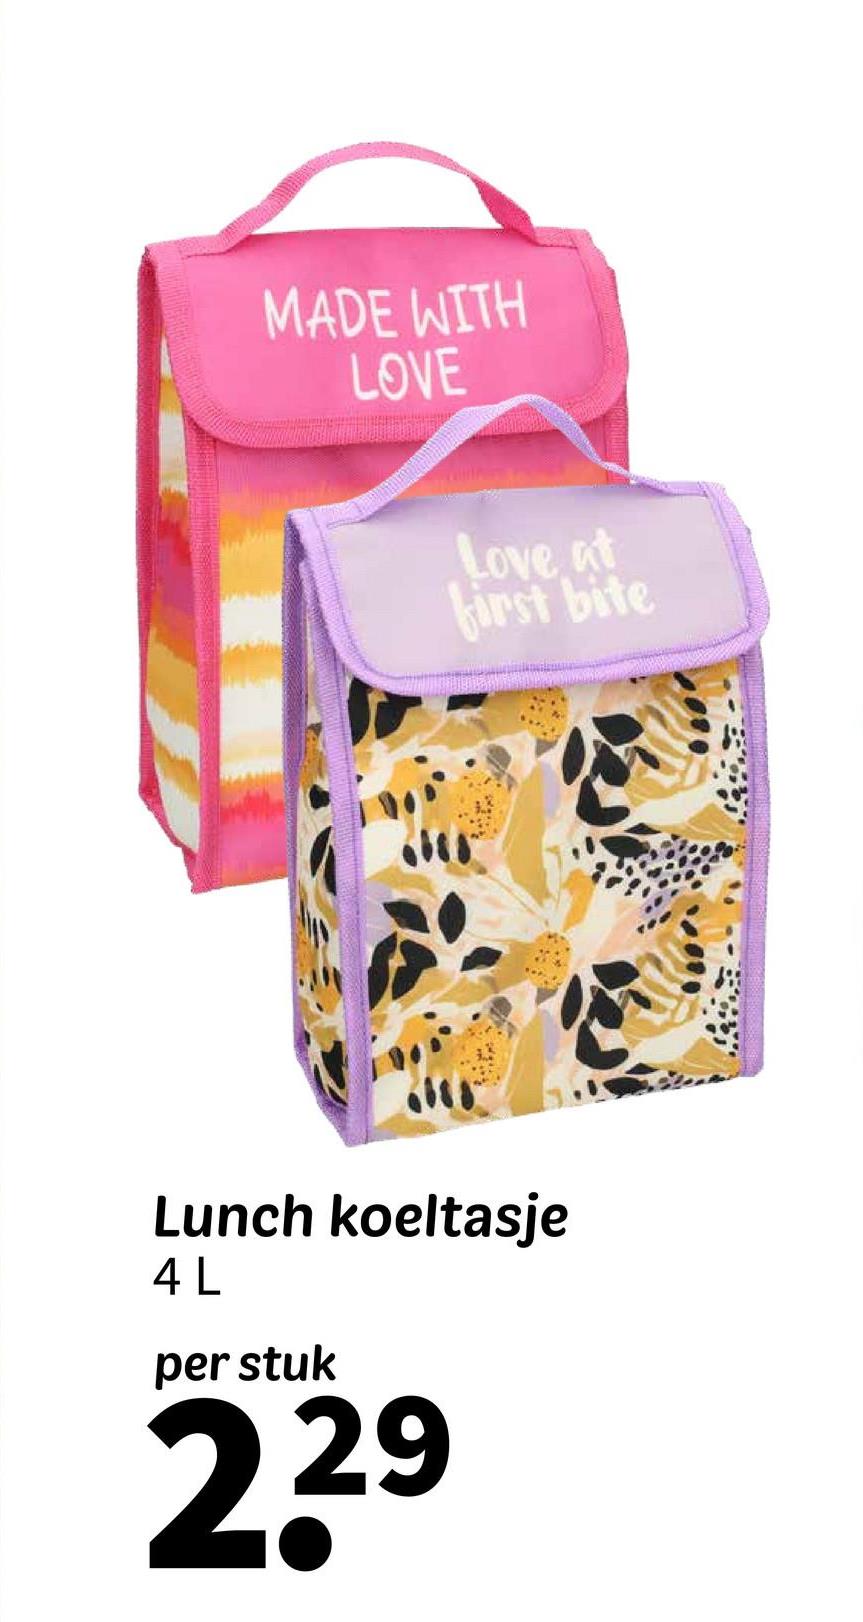 MADE WITH
LOVE
Love at
first bite
Lunch koeltasje
4 L
per stuk
2.29